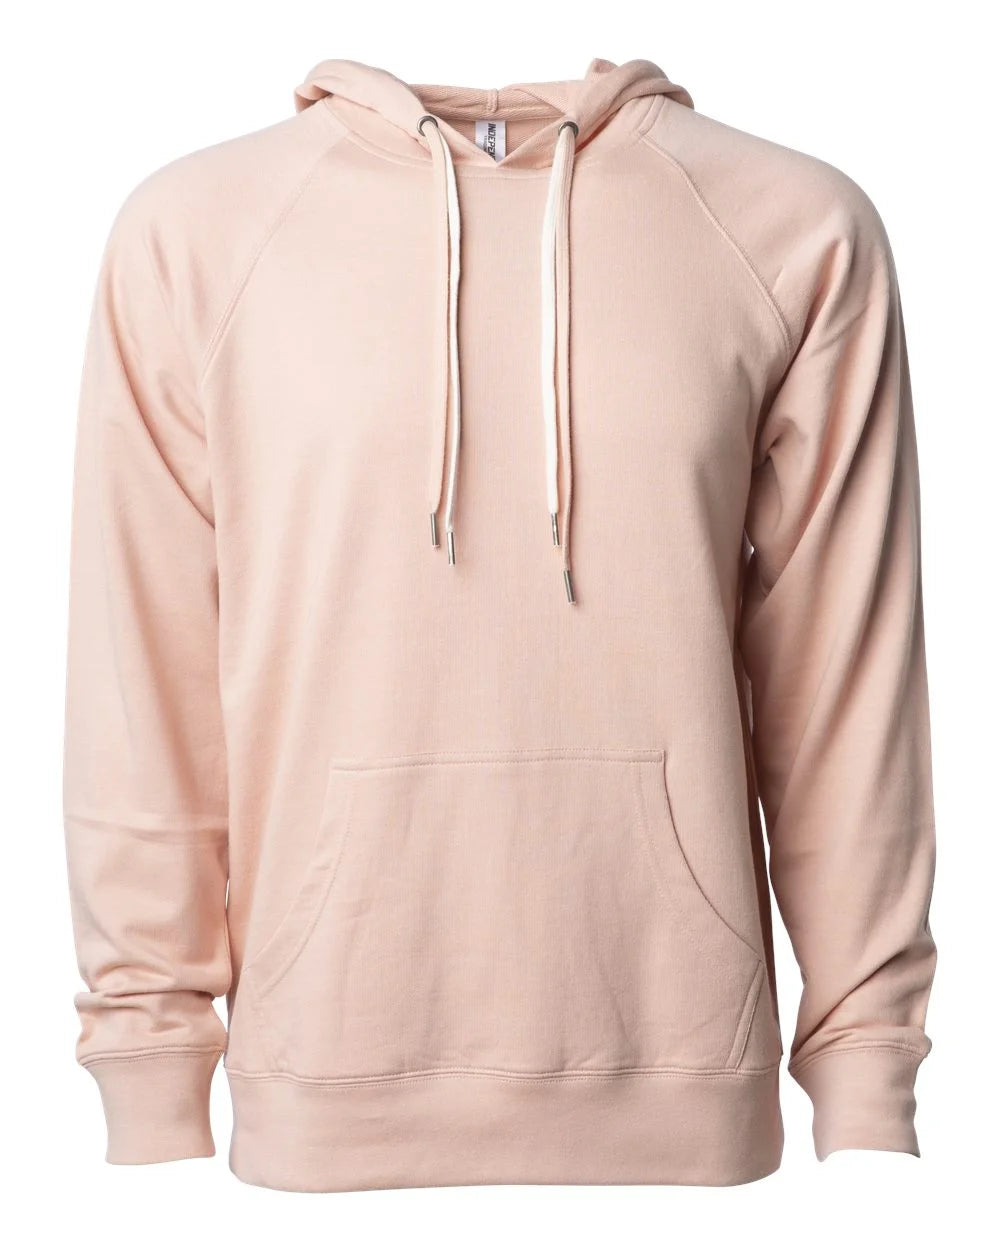 Large Rose Independent Trading CO Lightweight Hoodie